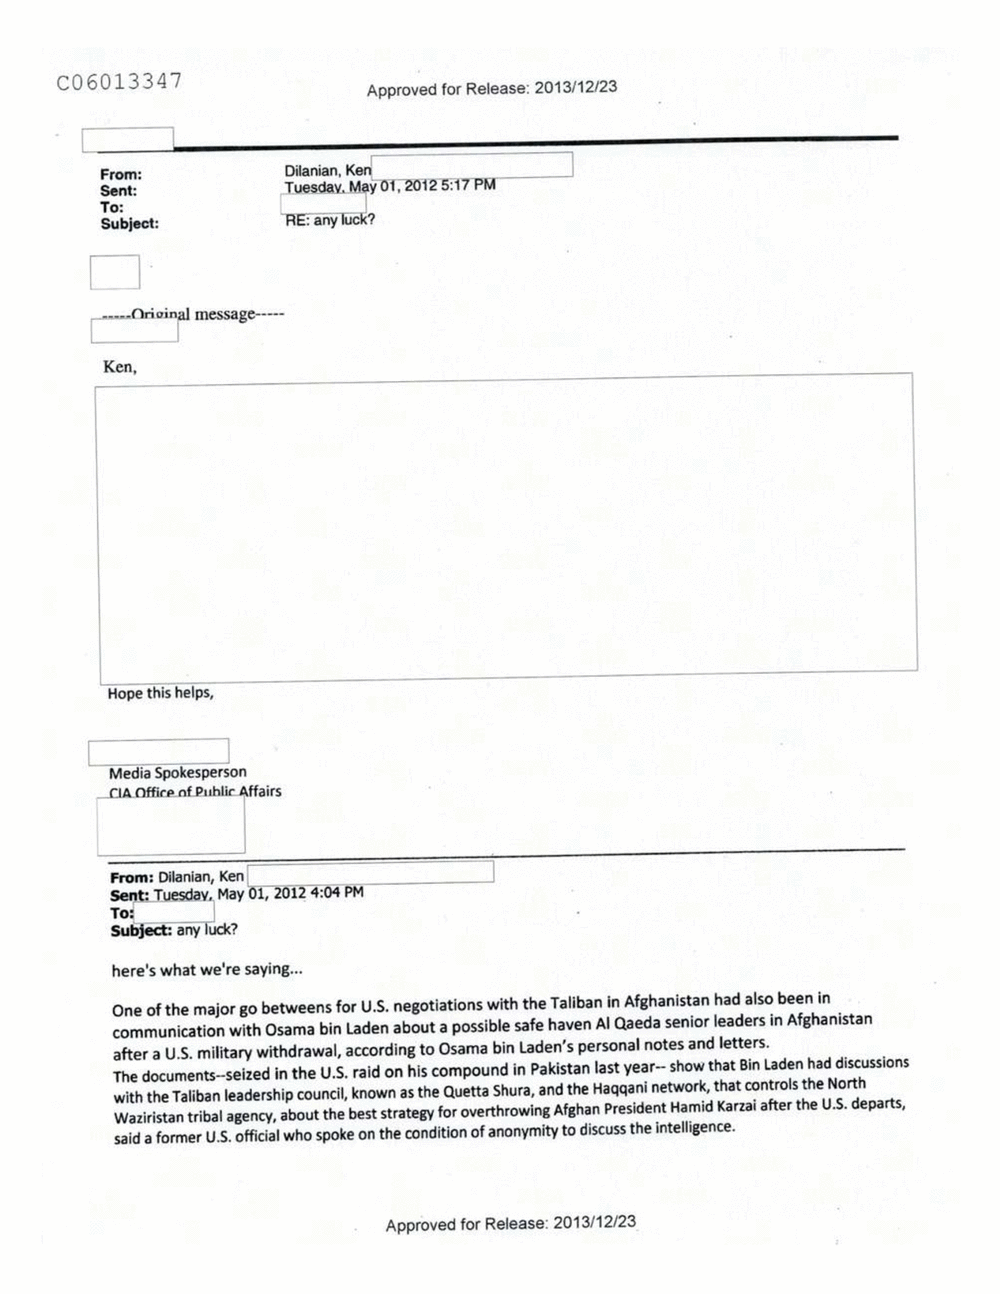 Page 255 from Email Correspondence Between Reporters and CIA Flacks